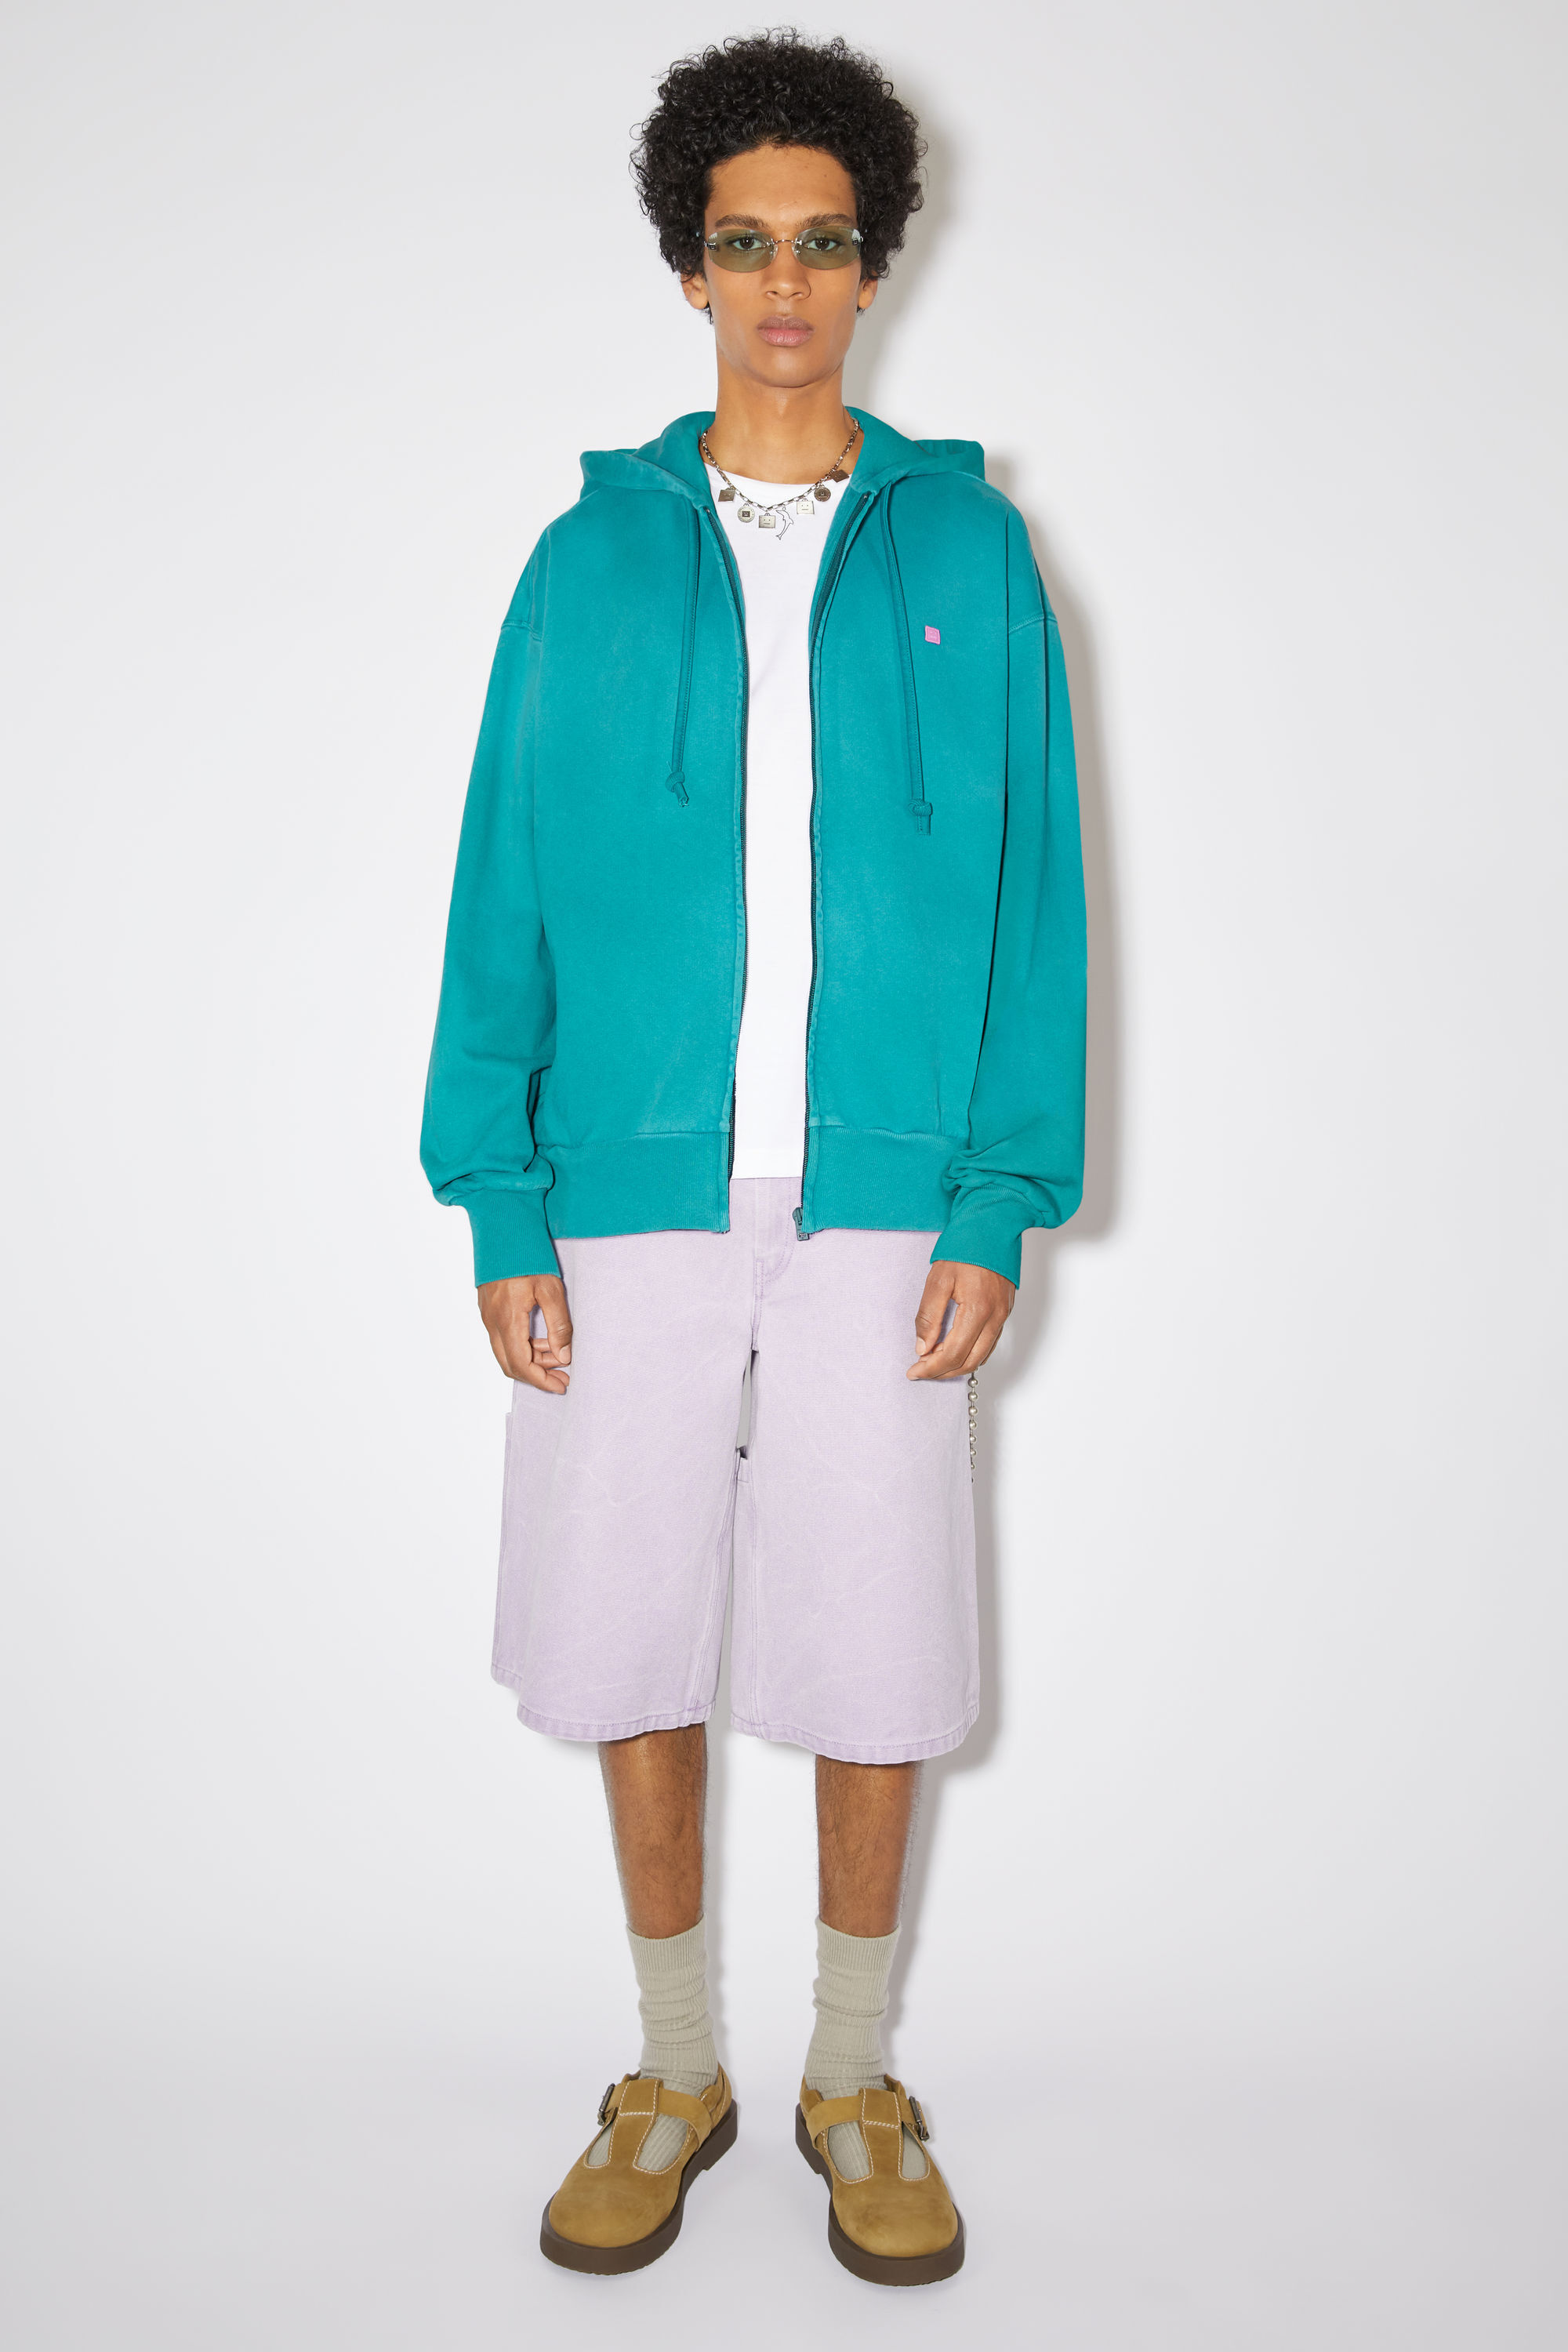 Acne Studios - Hooded zippered sweatshirt - Relaxed fit - Sea green